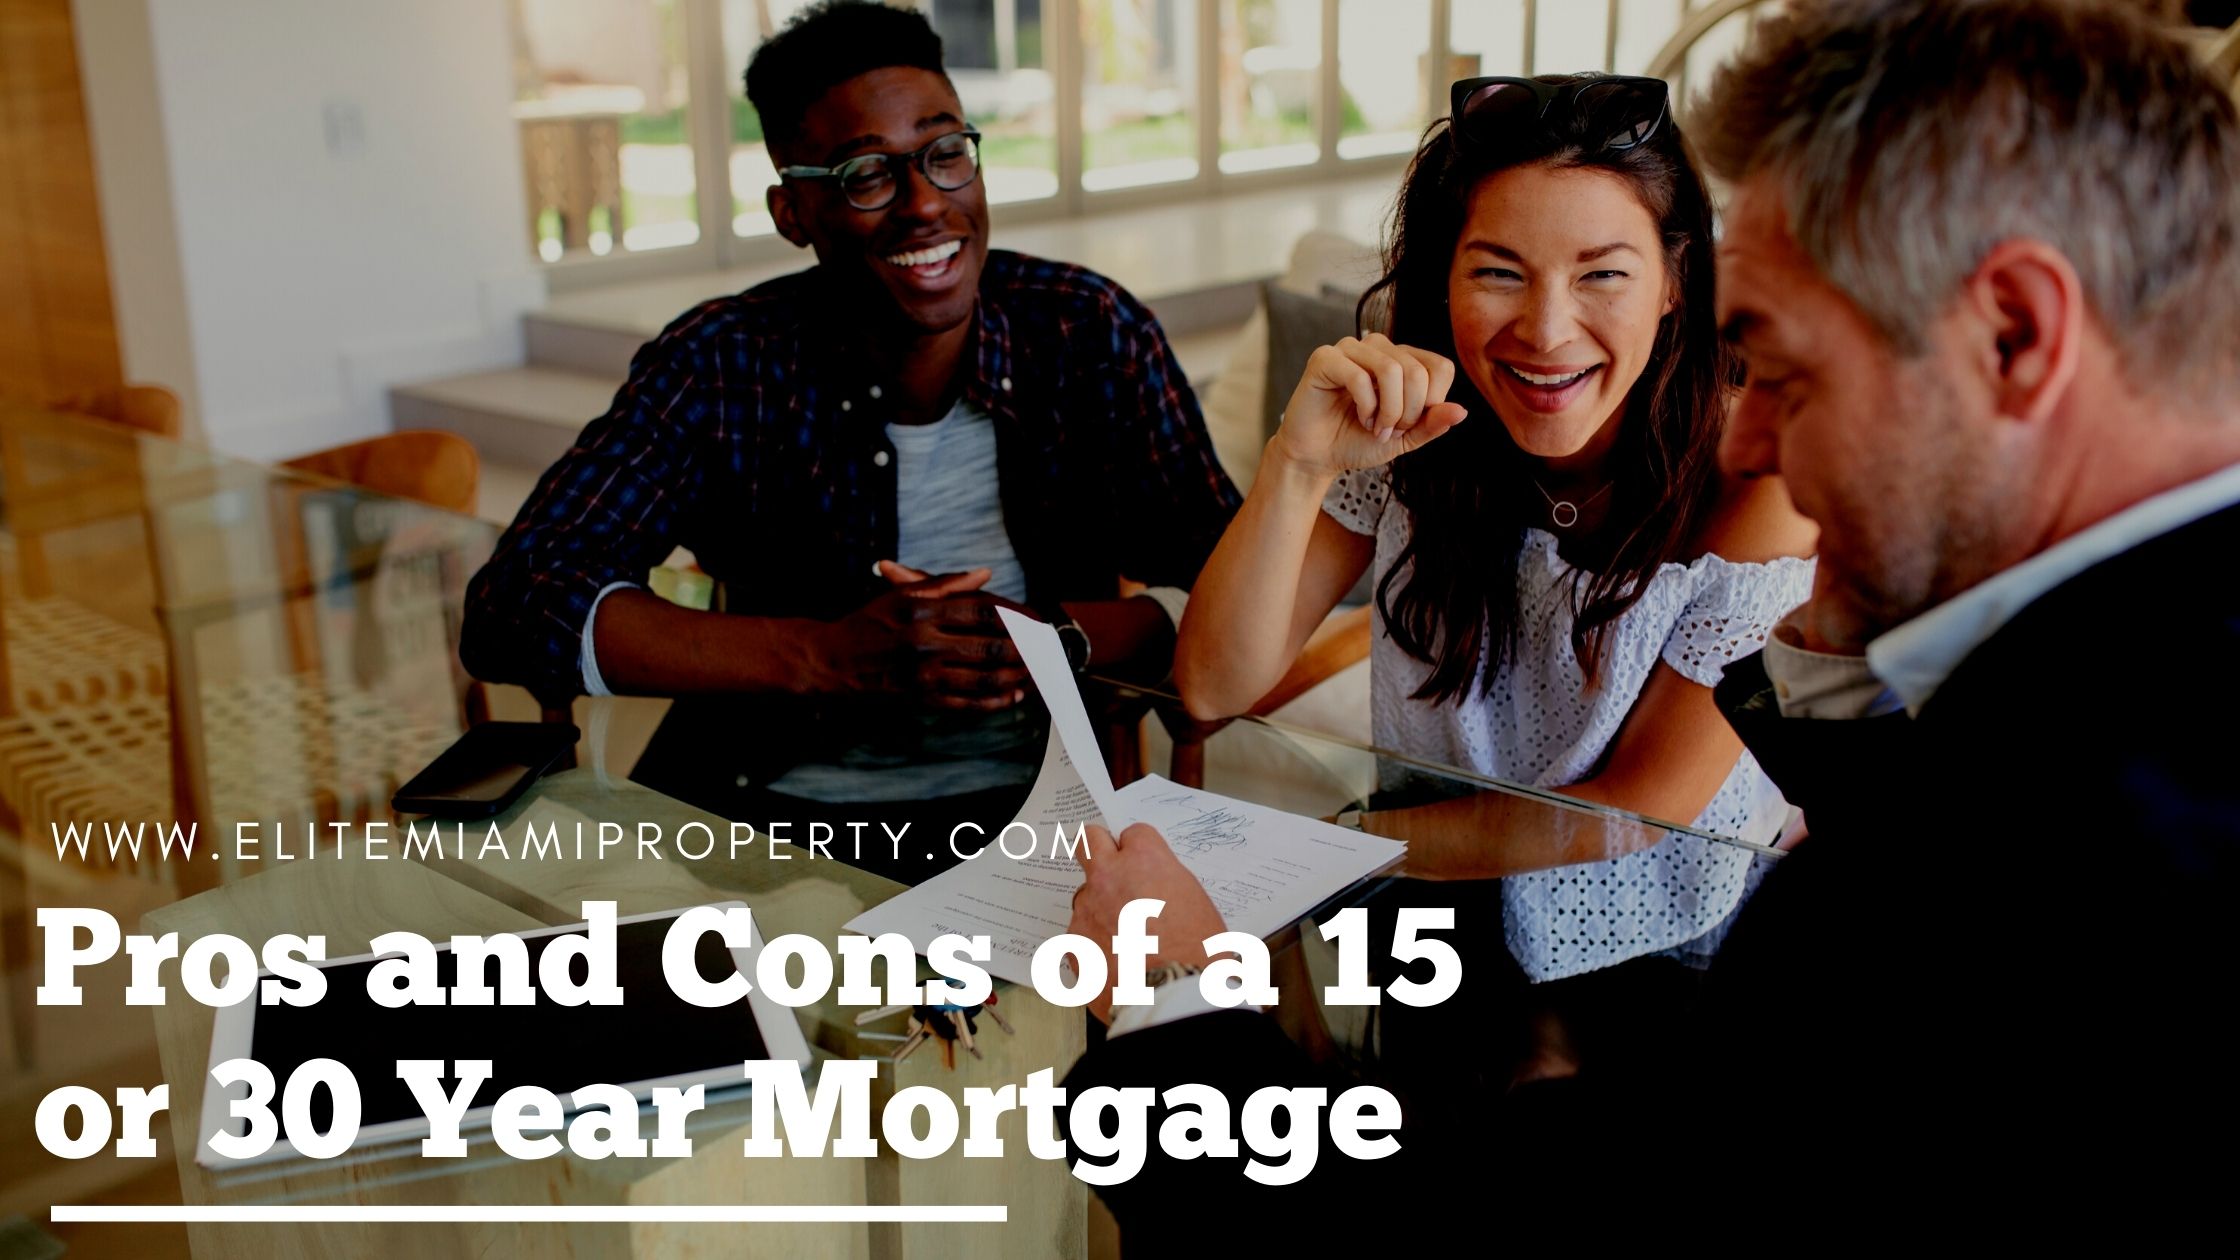 Pros and Cons of a 15 or 30 Year Mortgage